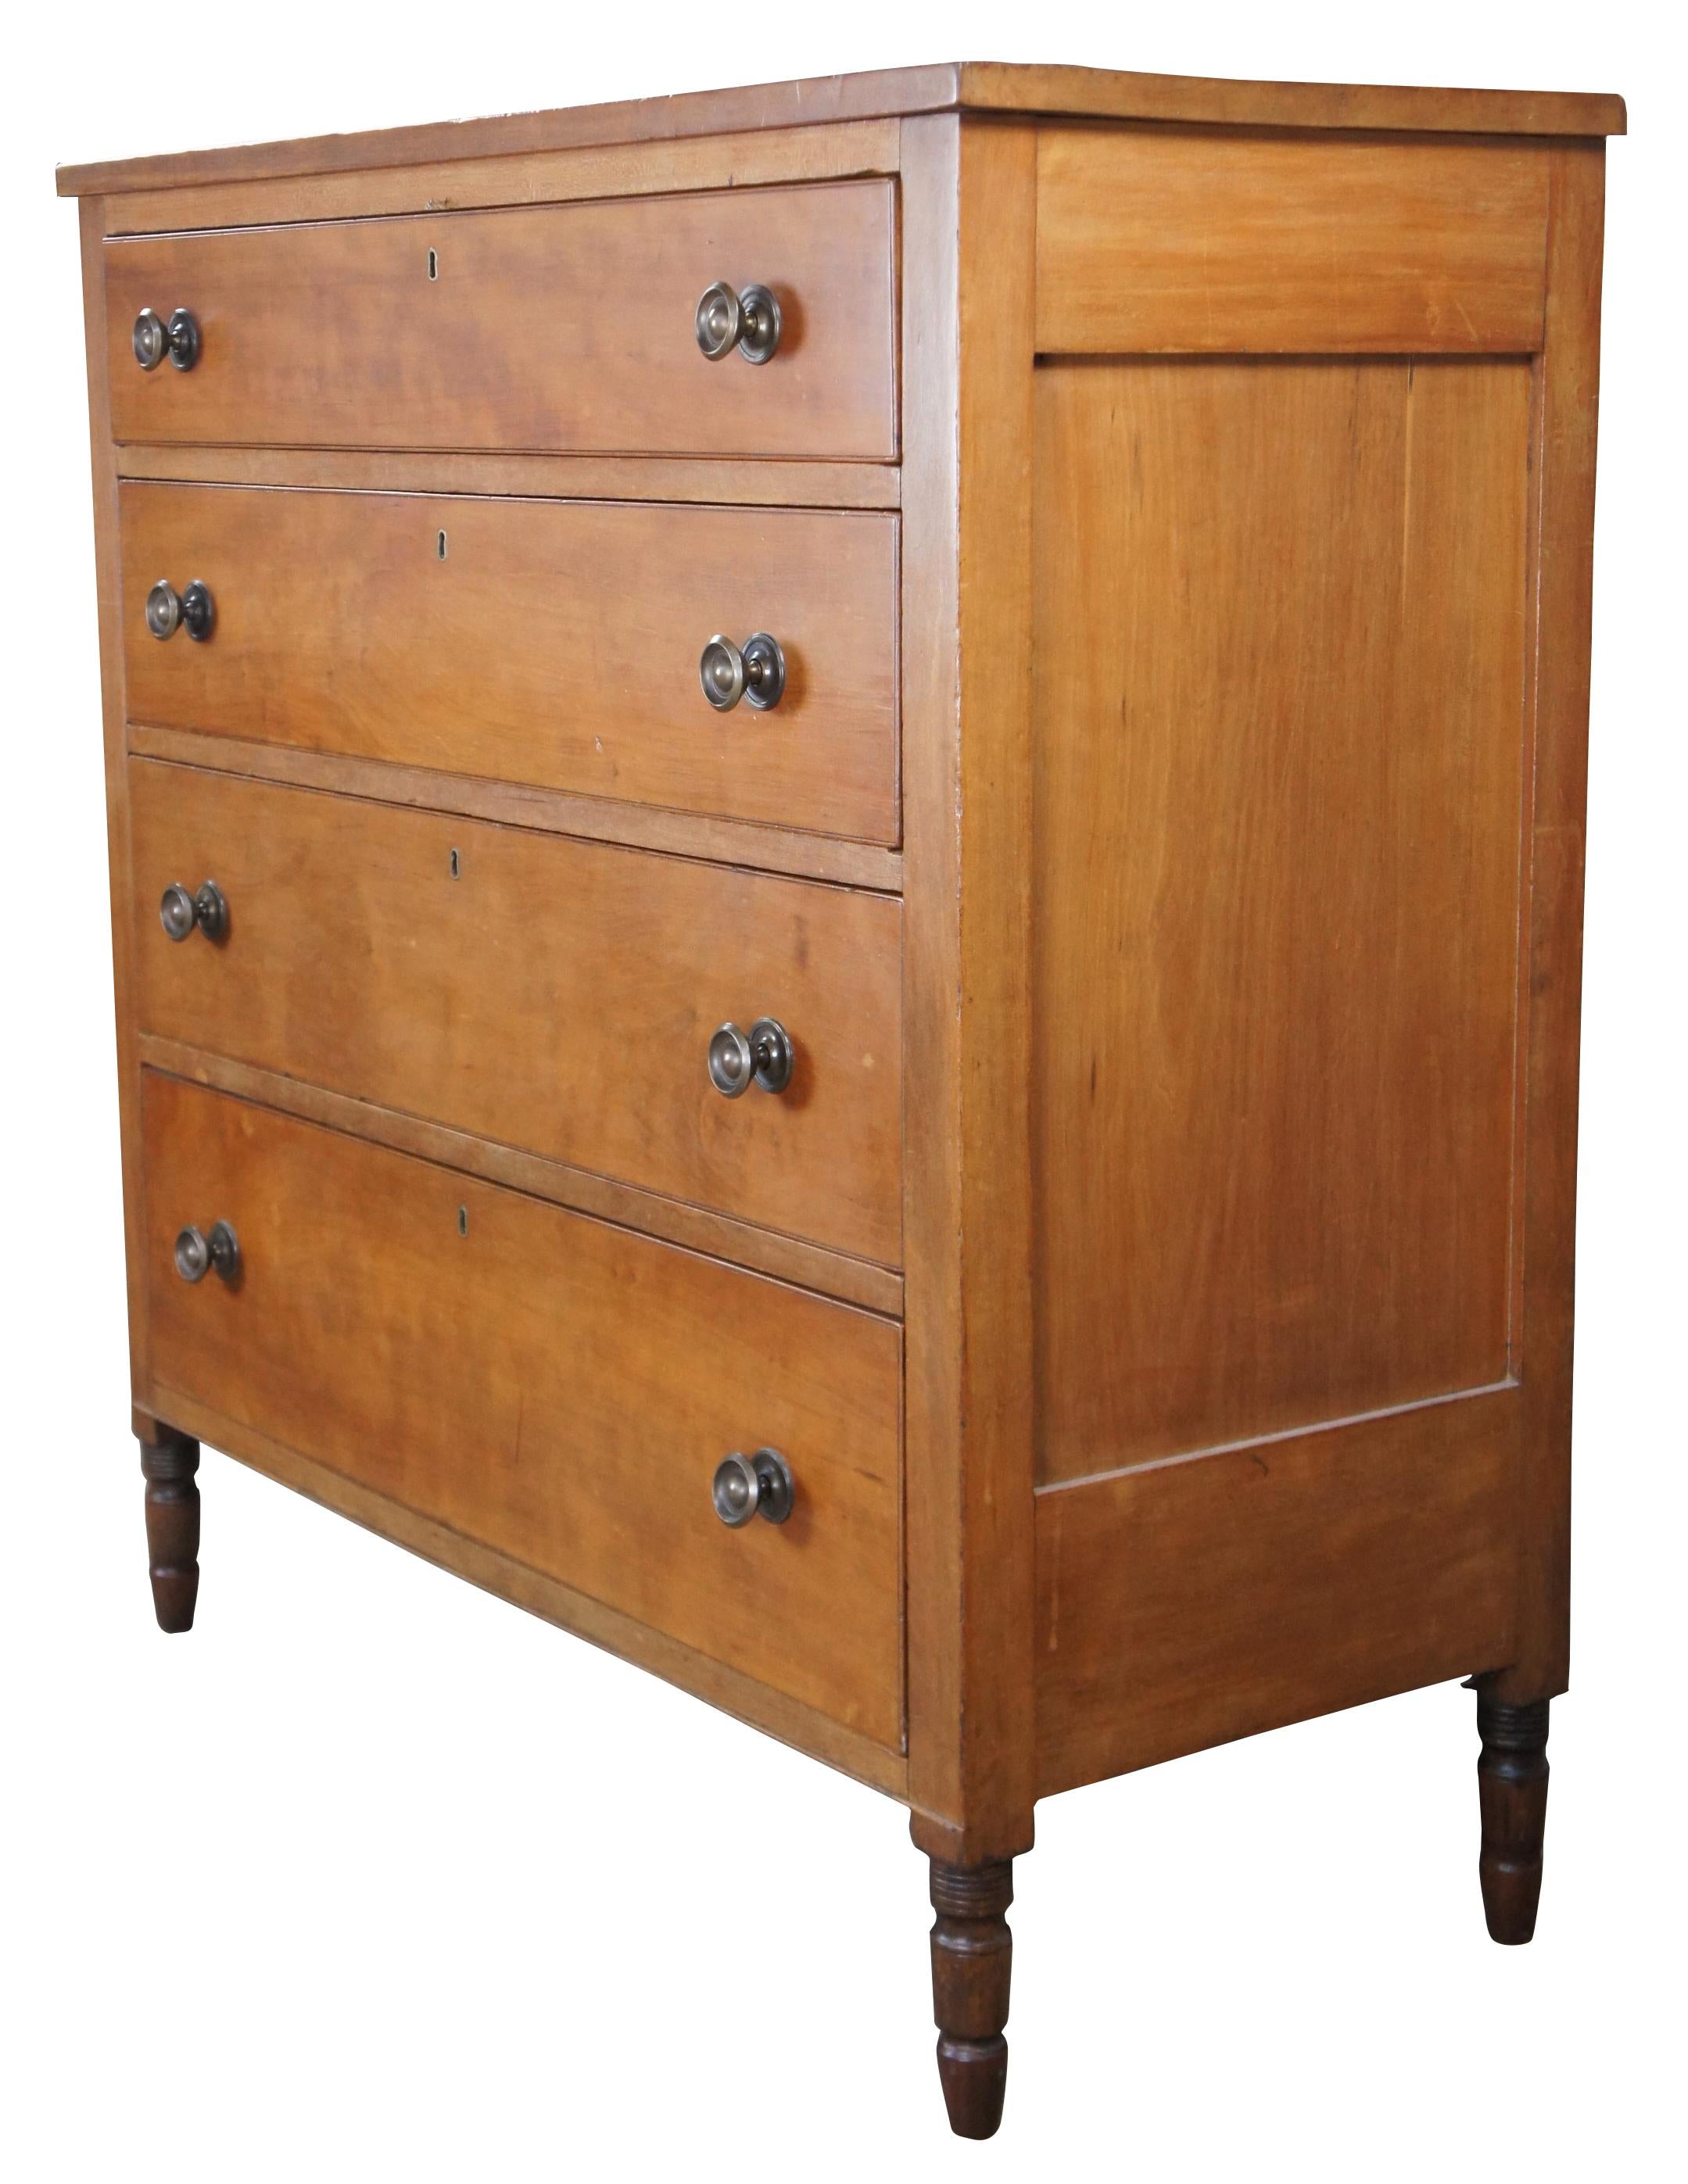 Impressive American tallboy dresser, circa 1850s. A rectangular form made from solid cherry with four graduated hand dovetailed drawers with brass hardware, turned ribbed and arrow feet.
 